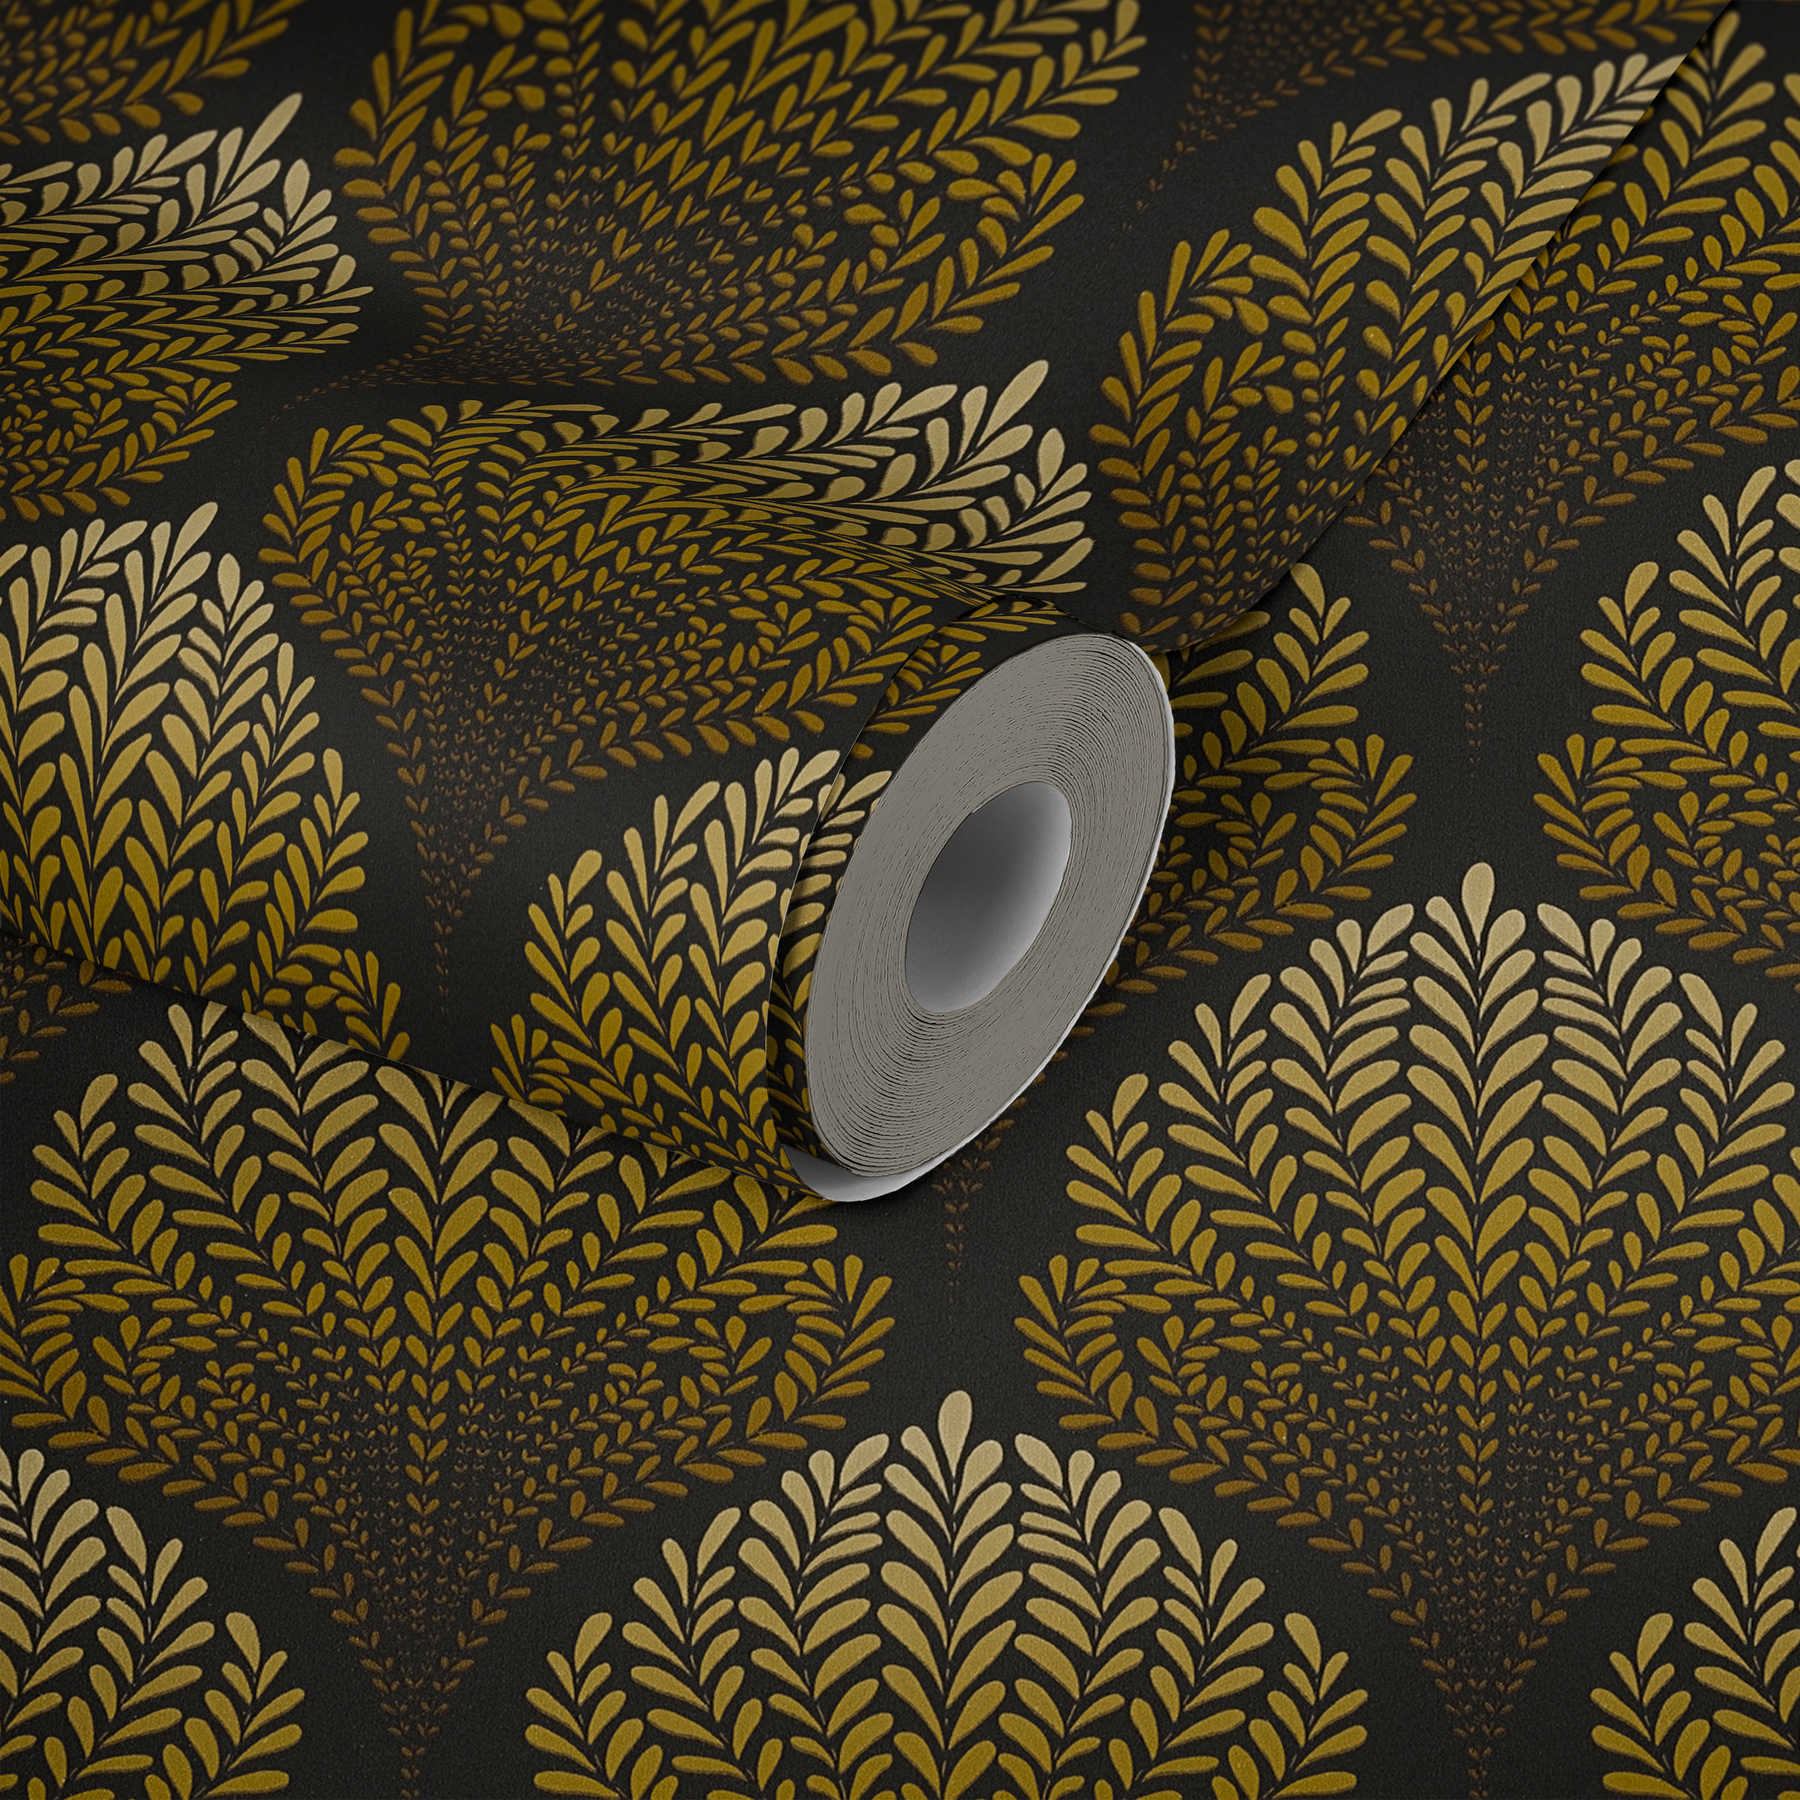             Retro wallpaper with gold ornaments - brown, yellow, black
        